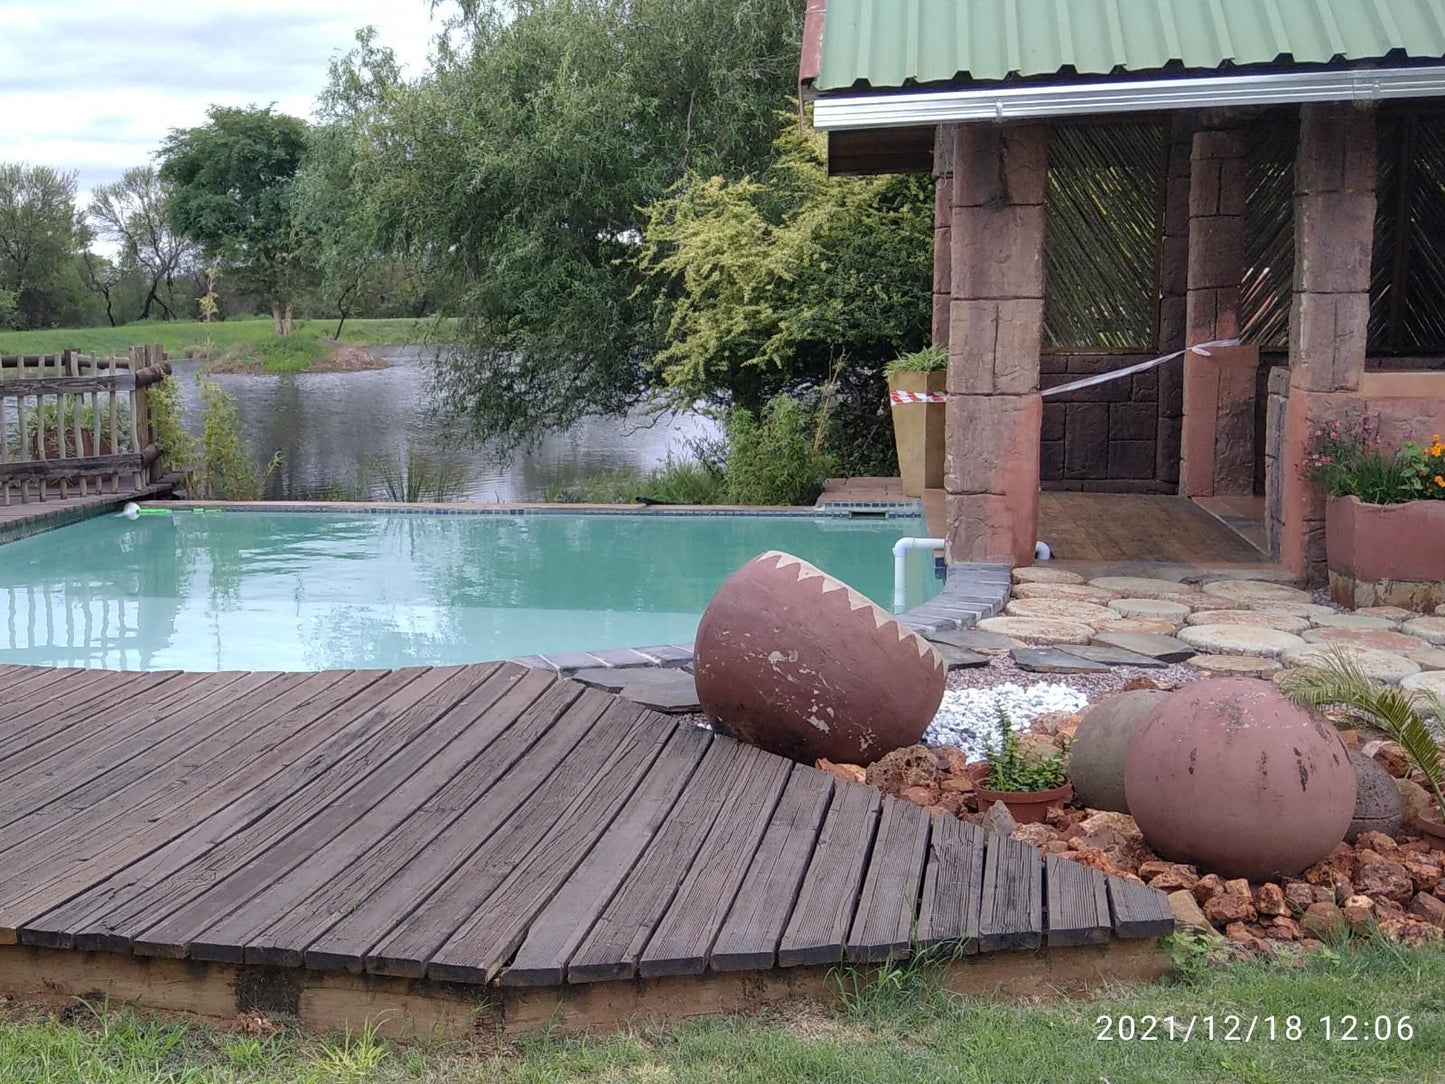 Hanlin Lodge Modimolle Nylstroom Limpopo Province South Africa River, Nature, Waters, Swimming Pool